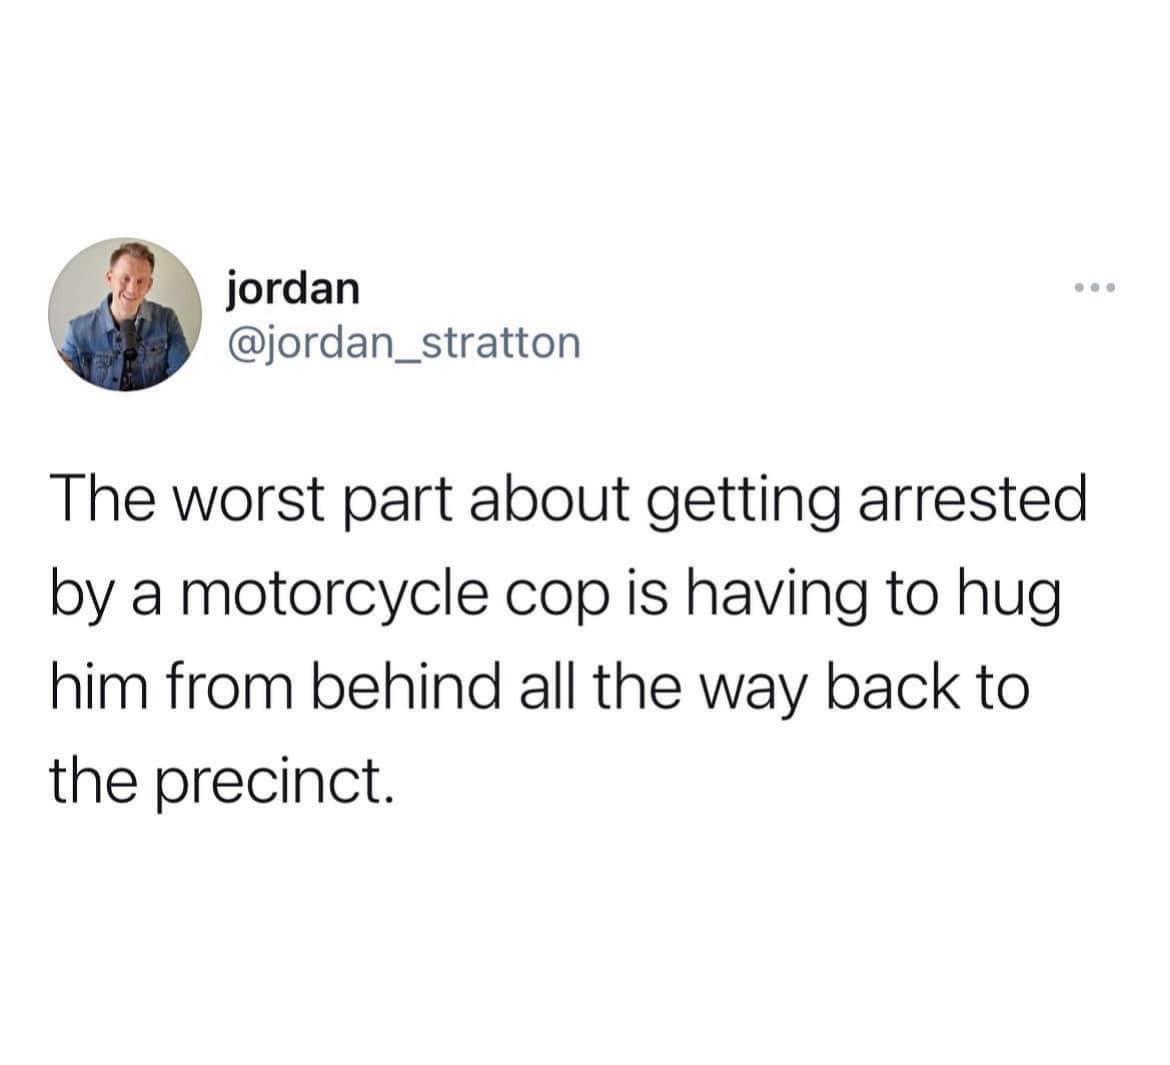 law of the giants meme - jordan The worst part about getting arrested by a motorcycle cop is having to hug him from behind all the way back to the precinct.